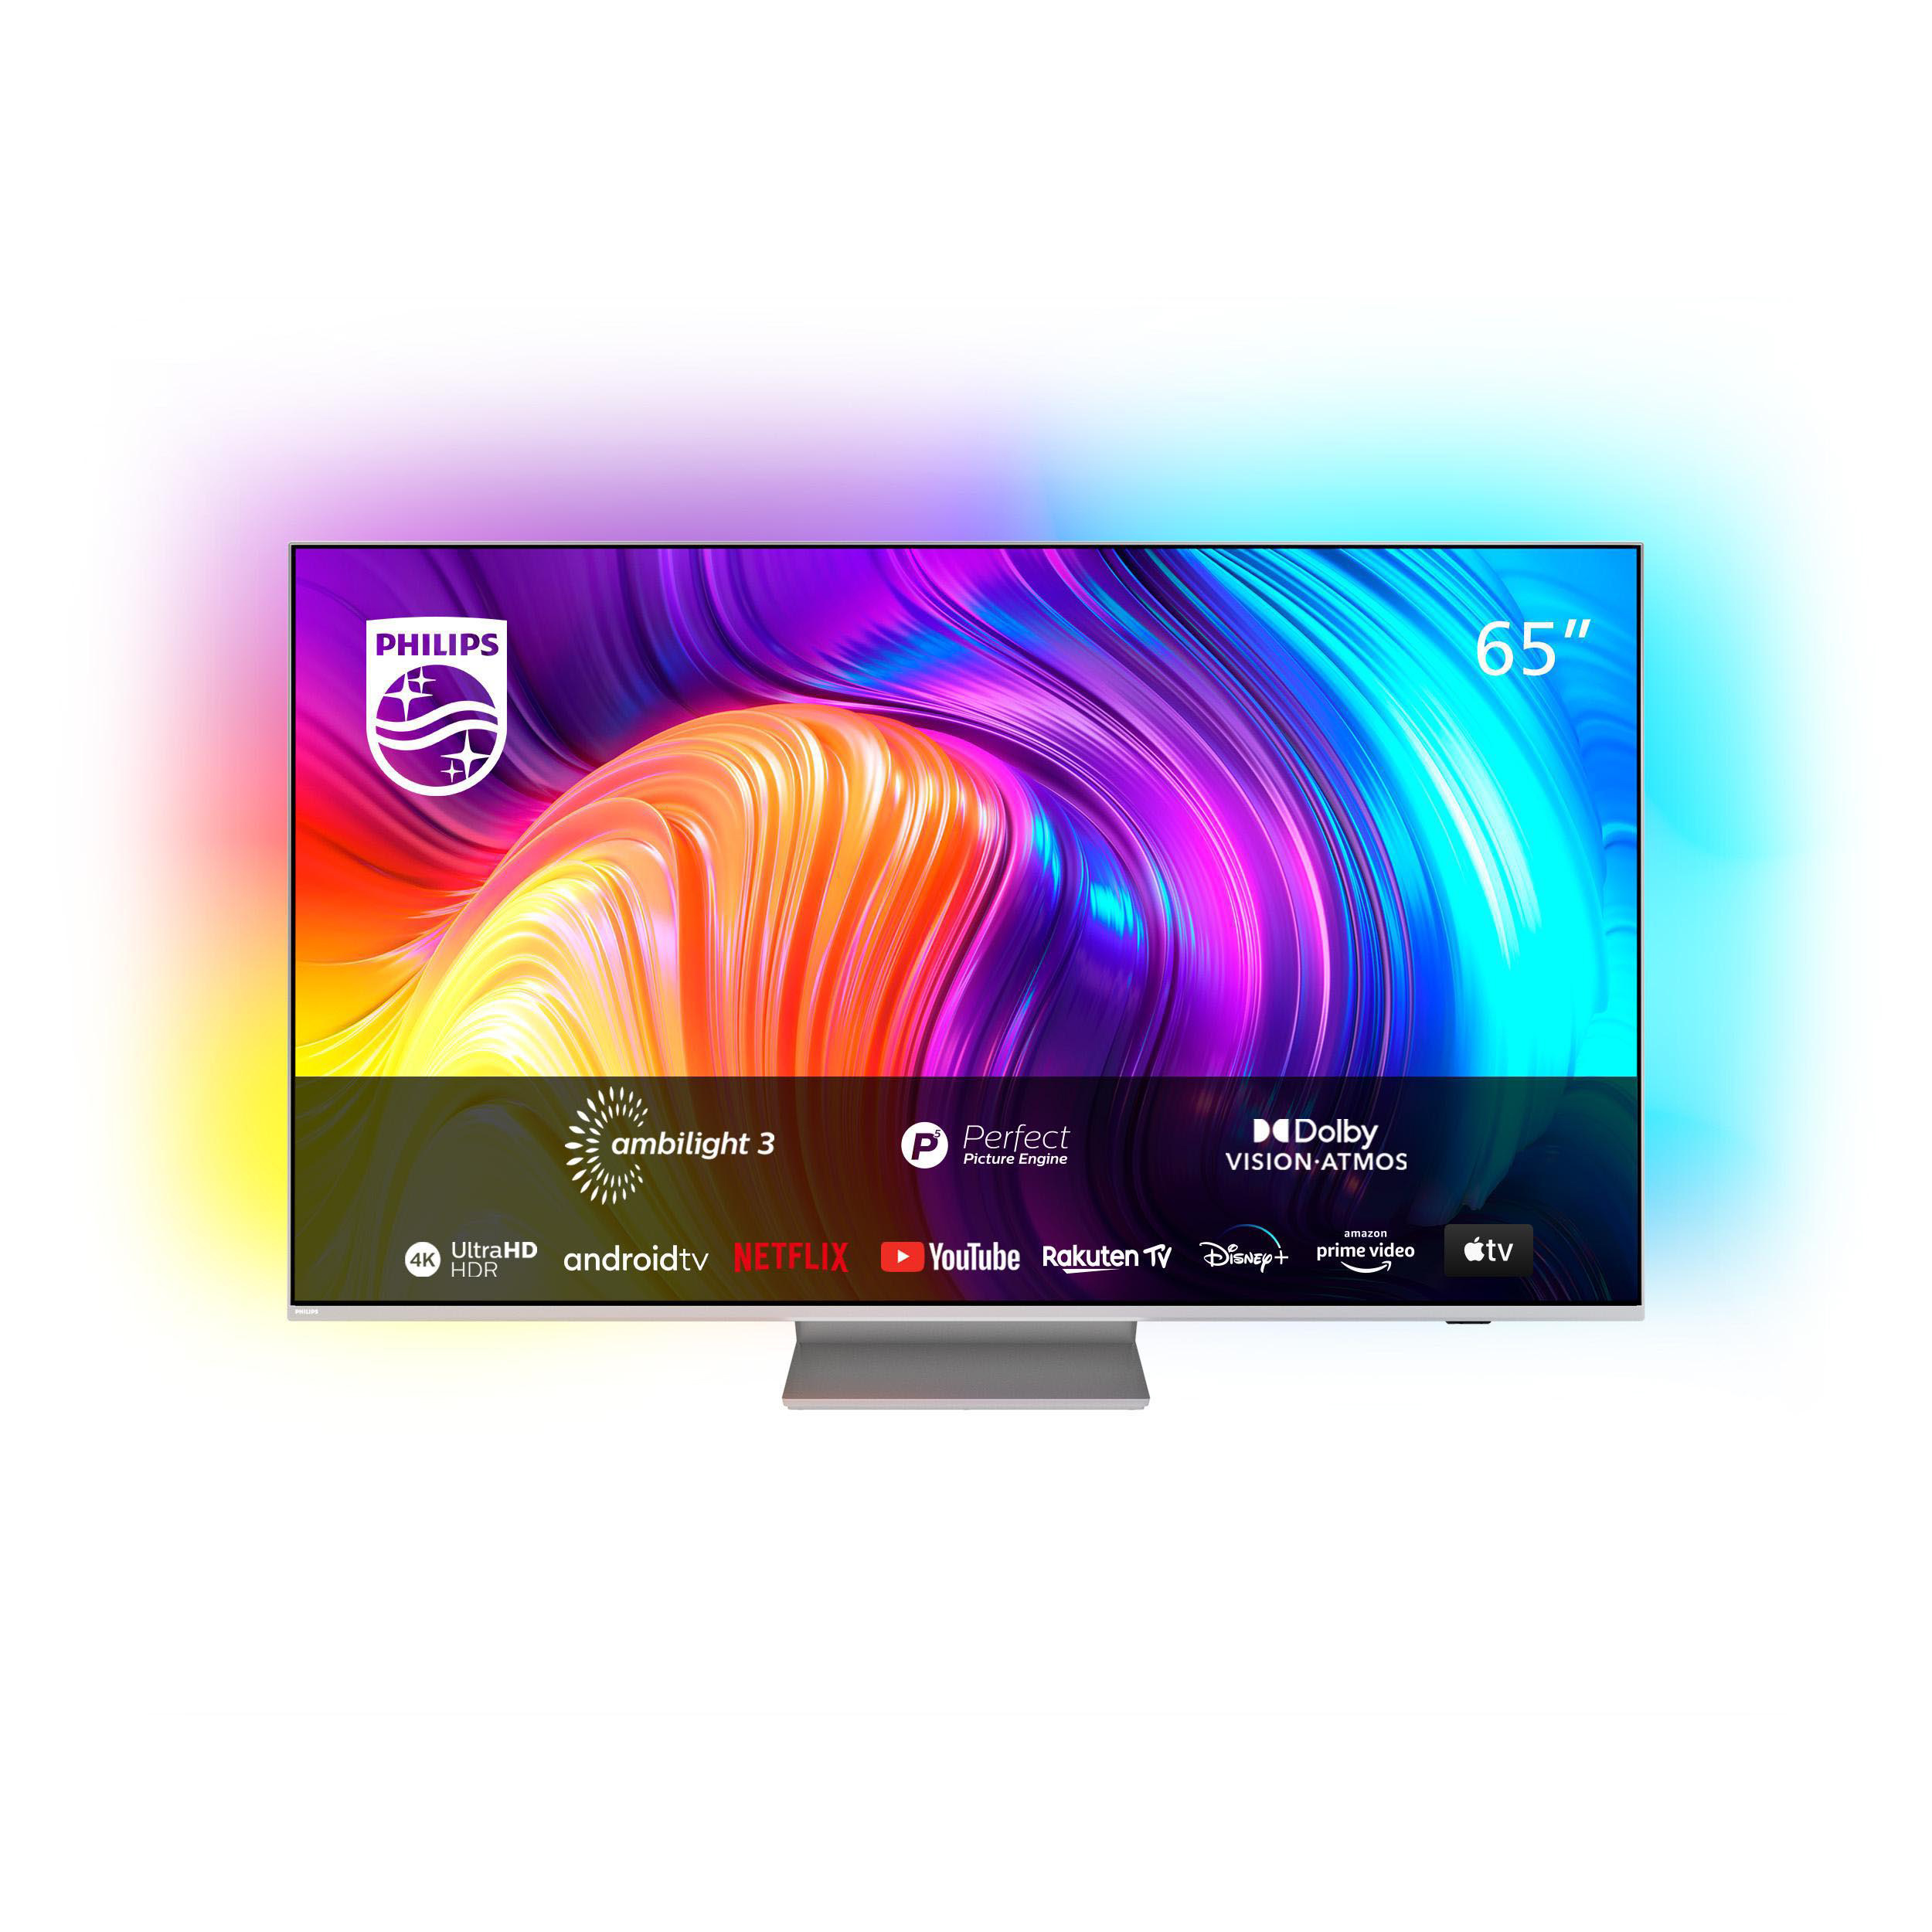 PHILIPS 65PUS8837/12 The One UHD / LED SMART 65 (Flat, TV™ 4K, Zoll TV, TV (R)) cm, Ambilight, 164 Android 11